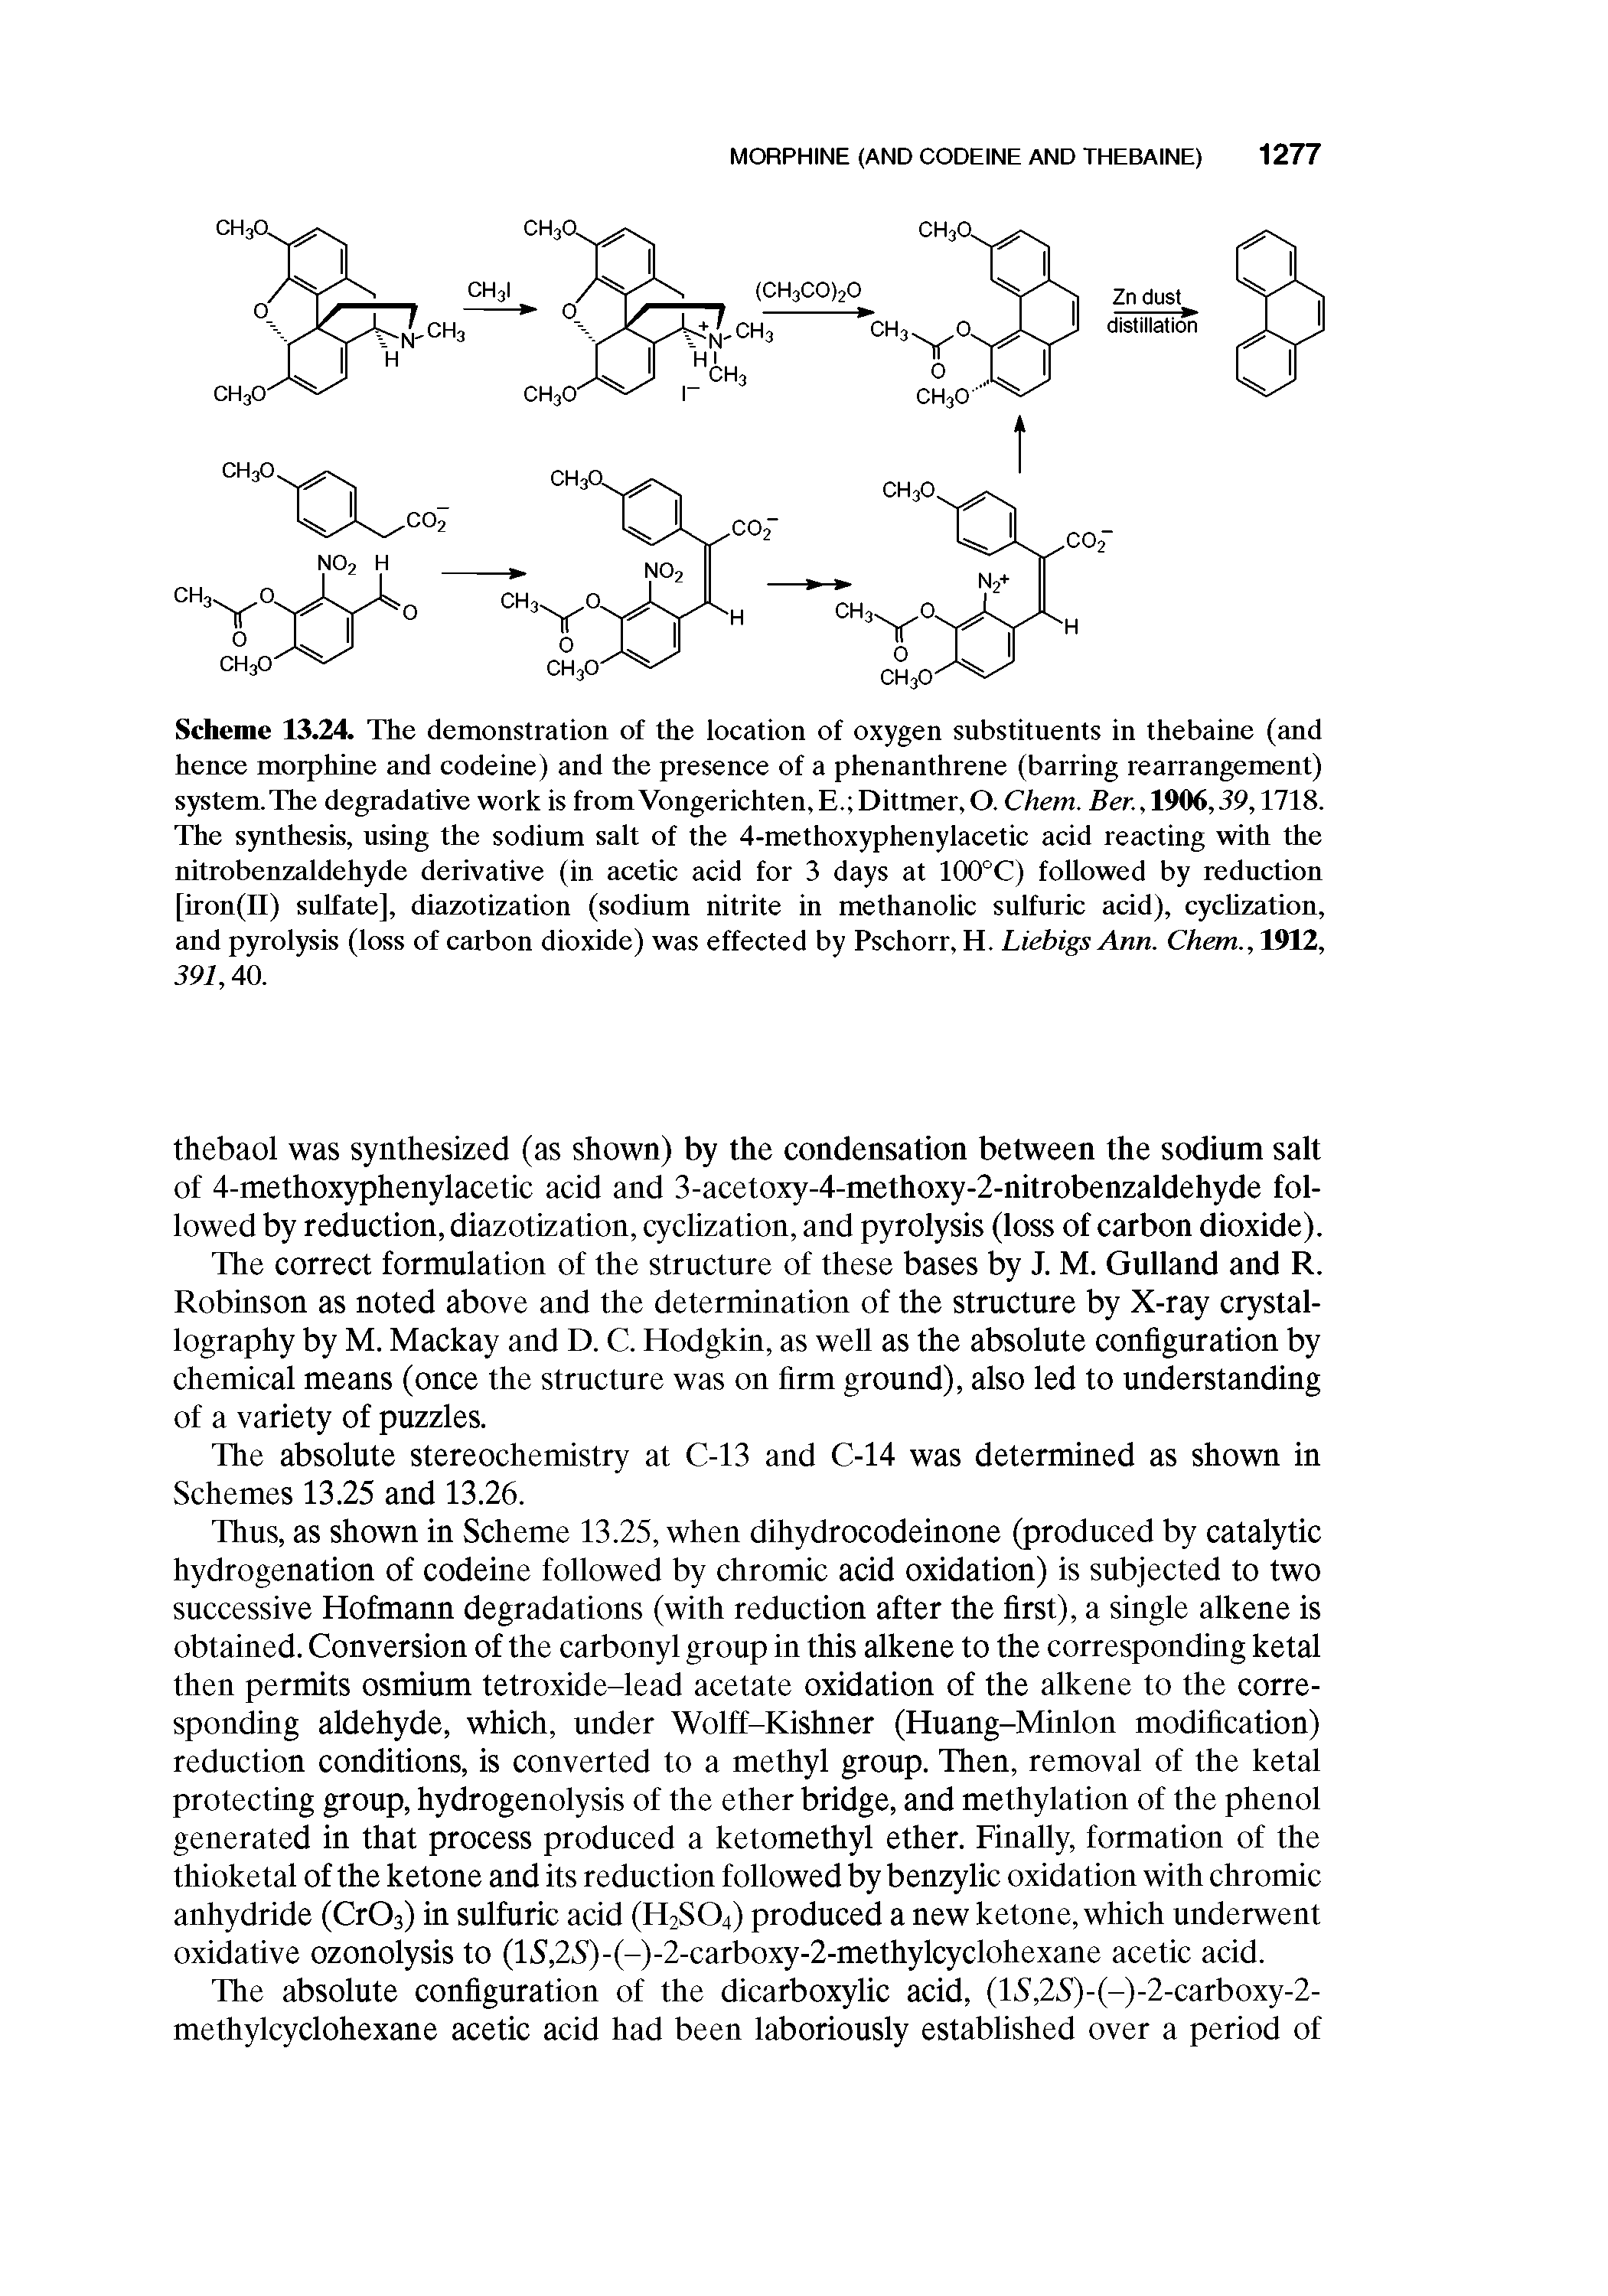 Scheme 13.24. The demonstration of the location of oxygen substituents in thebaine (and hence morphine and codeine) and the presence of a phenanthrene (barring rearrangement) system. The degradative work is from Vongerichten, E. Dittmer, O. Chem. Ber., 1906,39,1718. The synthesis, using the sodium salt of the 4-methoxyphenylacetic acid reacting with the nitrobenzaldehyde derivative (in acetic acid for 3 days at 100°C) followed by reduction [rron(II) sulfate], diazotization (sodium nitrite in methanolic sulfuric acid), cychzation, and pyrolysis (loss of carbon dioxide) was effected by Pschorr, H. Liebigs Ann. Chem., 1912, 391,40.